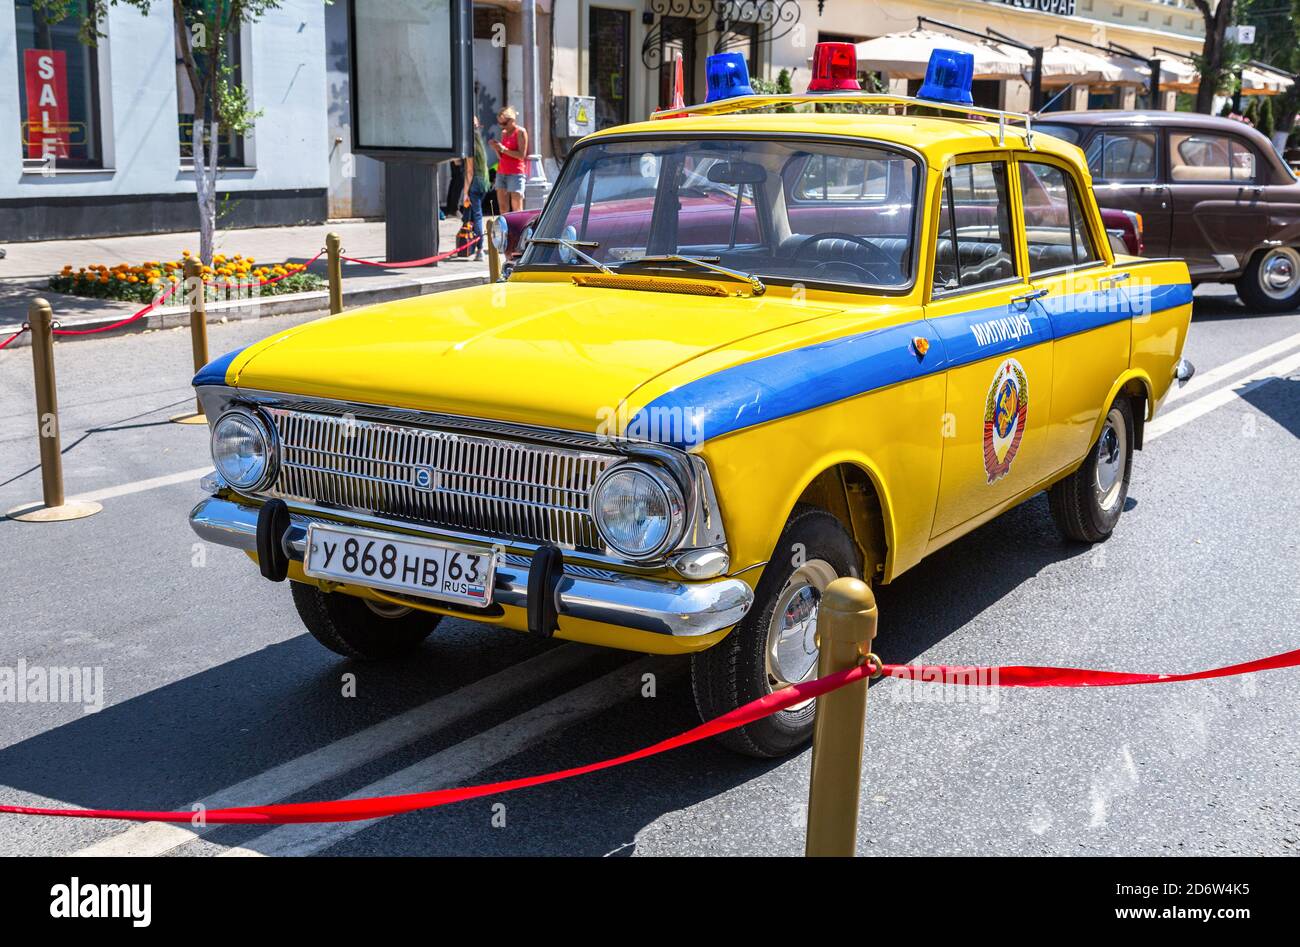 Samara, Russia - June 12, 2019: Vintage Soviet police automobile Moskvich 412 parked up at the city street Stock Photo